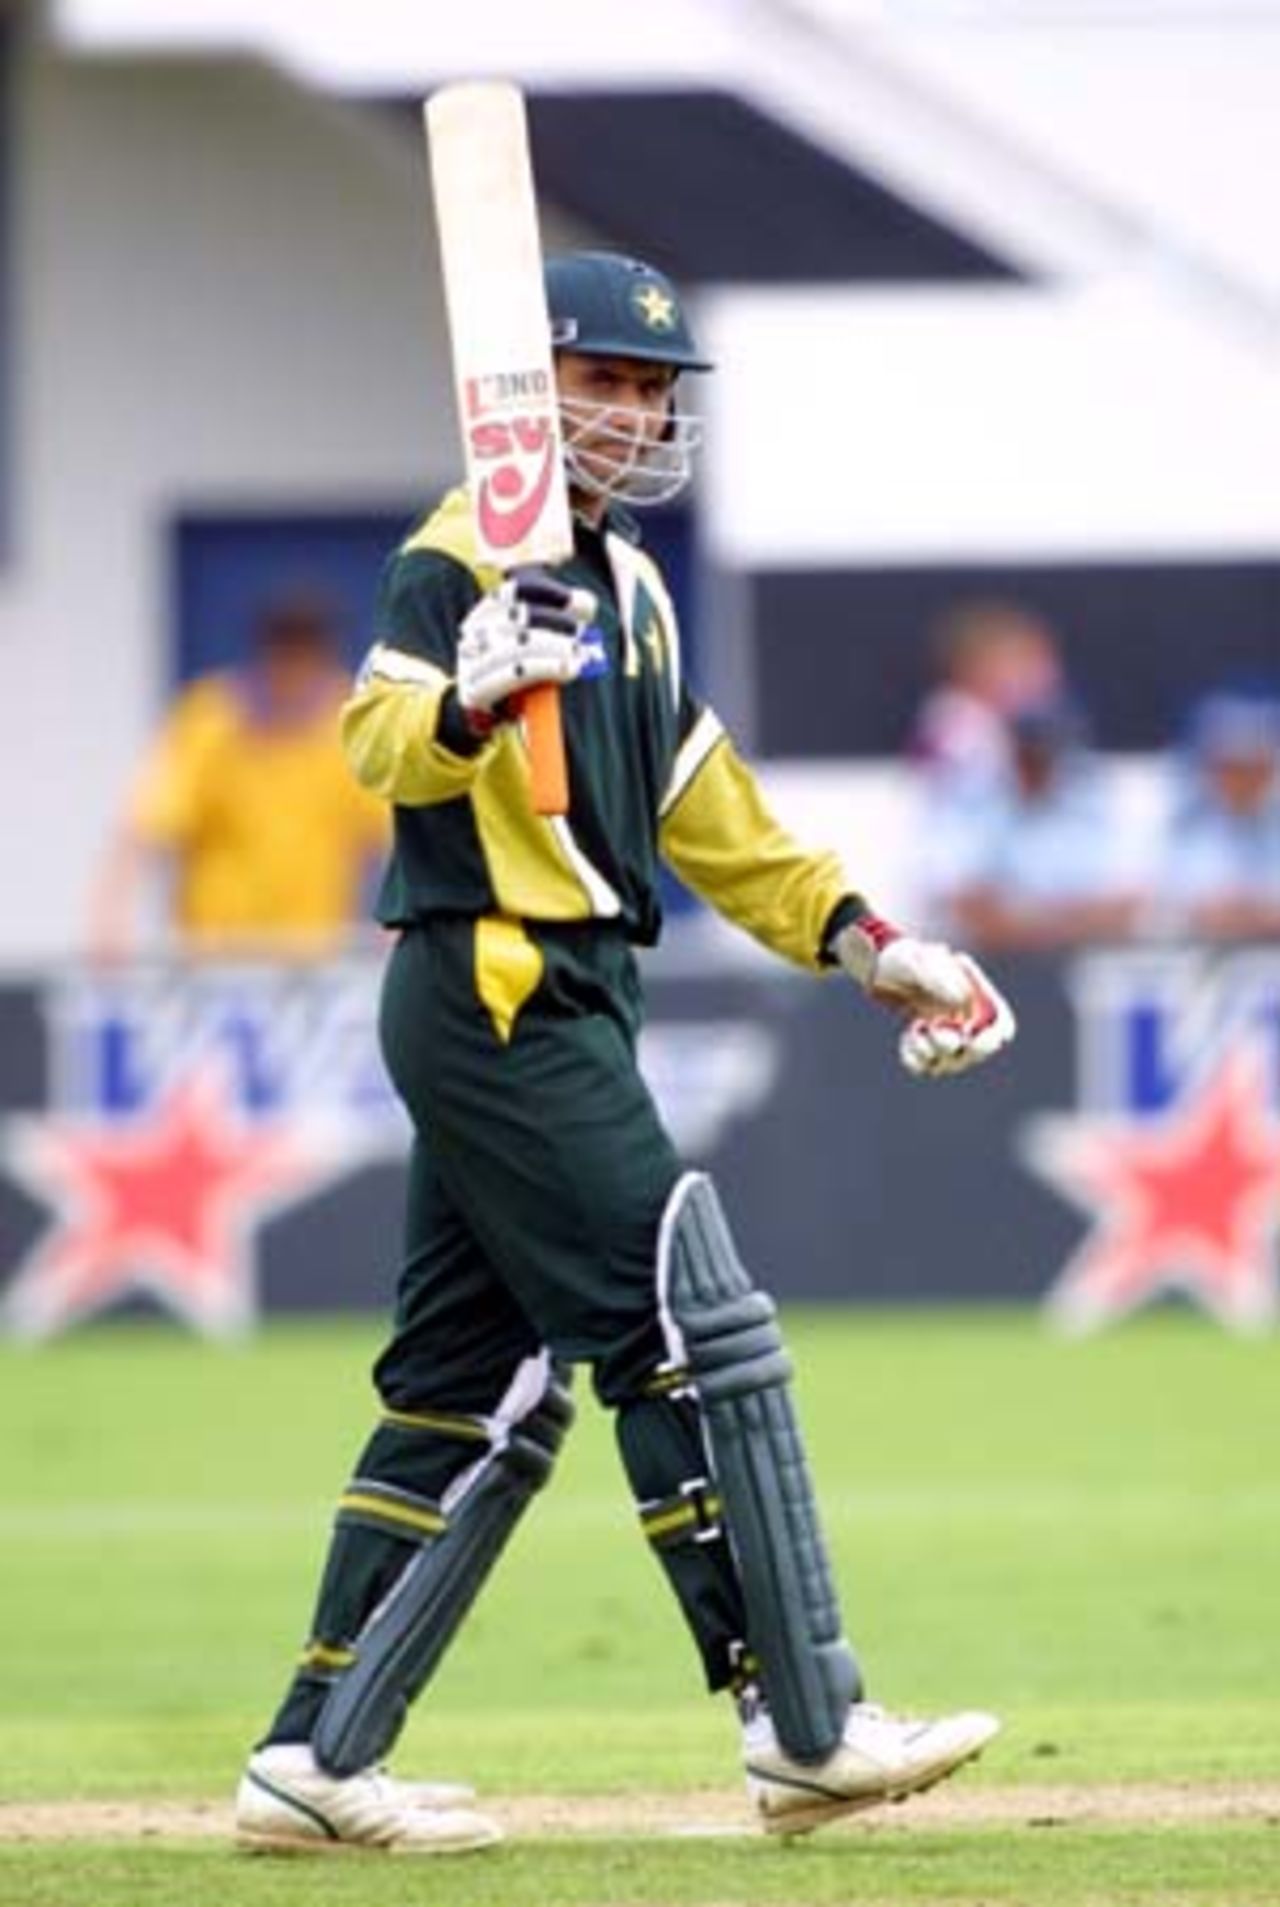 Pakistan batsman Abdur Razzaq raises his bat upon reaching his half century from 112 balls, only to be dismissed the very next ball, caught off the bowling of New Zealand fast medium bowler Chris Martin by Chris Harris for 50. 2nd One-Day International: New Zealand v Pakistan at McLean Park, Napier, 20 February 2001.